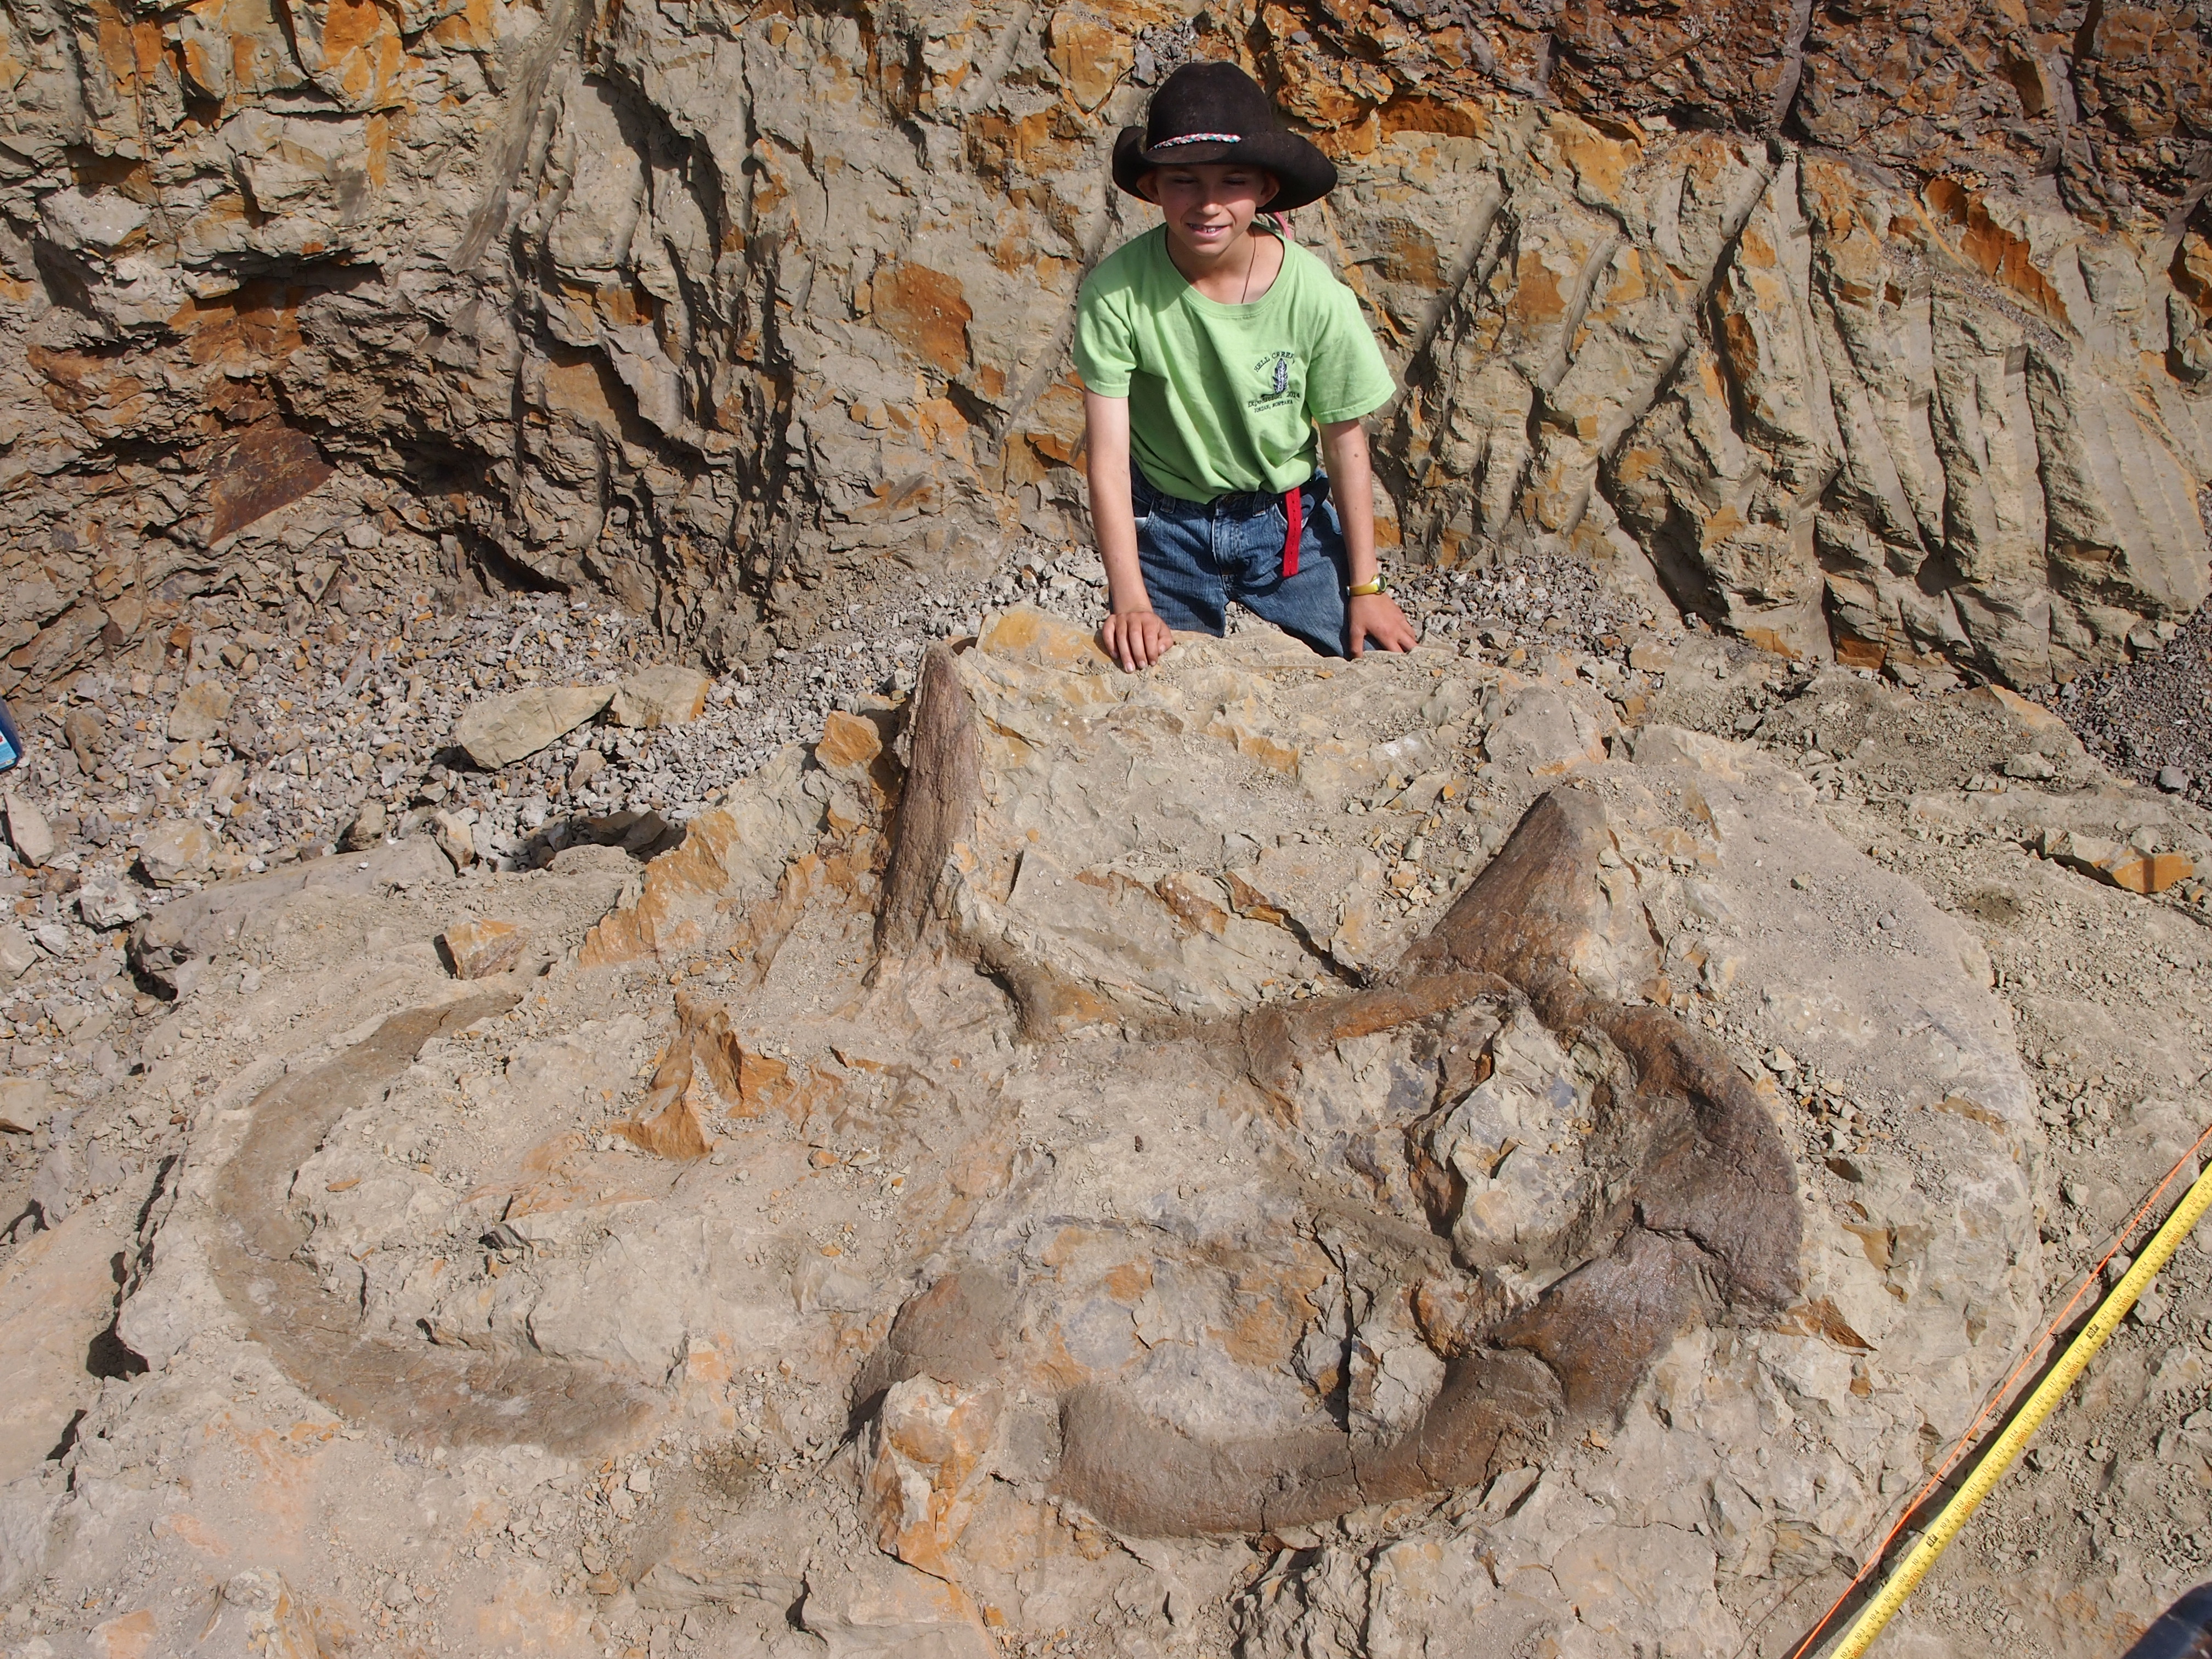 Named after its discoverer Luke Phipps, Luke is a Triceratops prorsus skeleton and skull mostly articulated. Very rare in the Hell Creek Formation. 